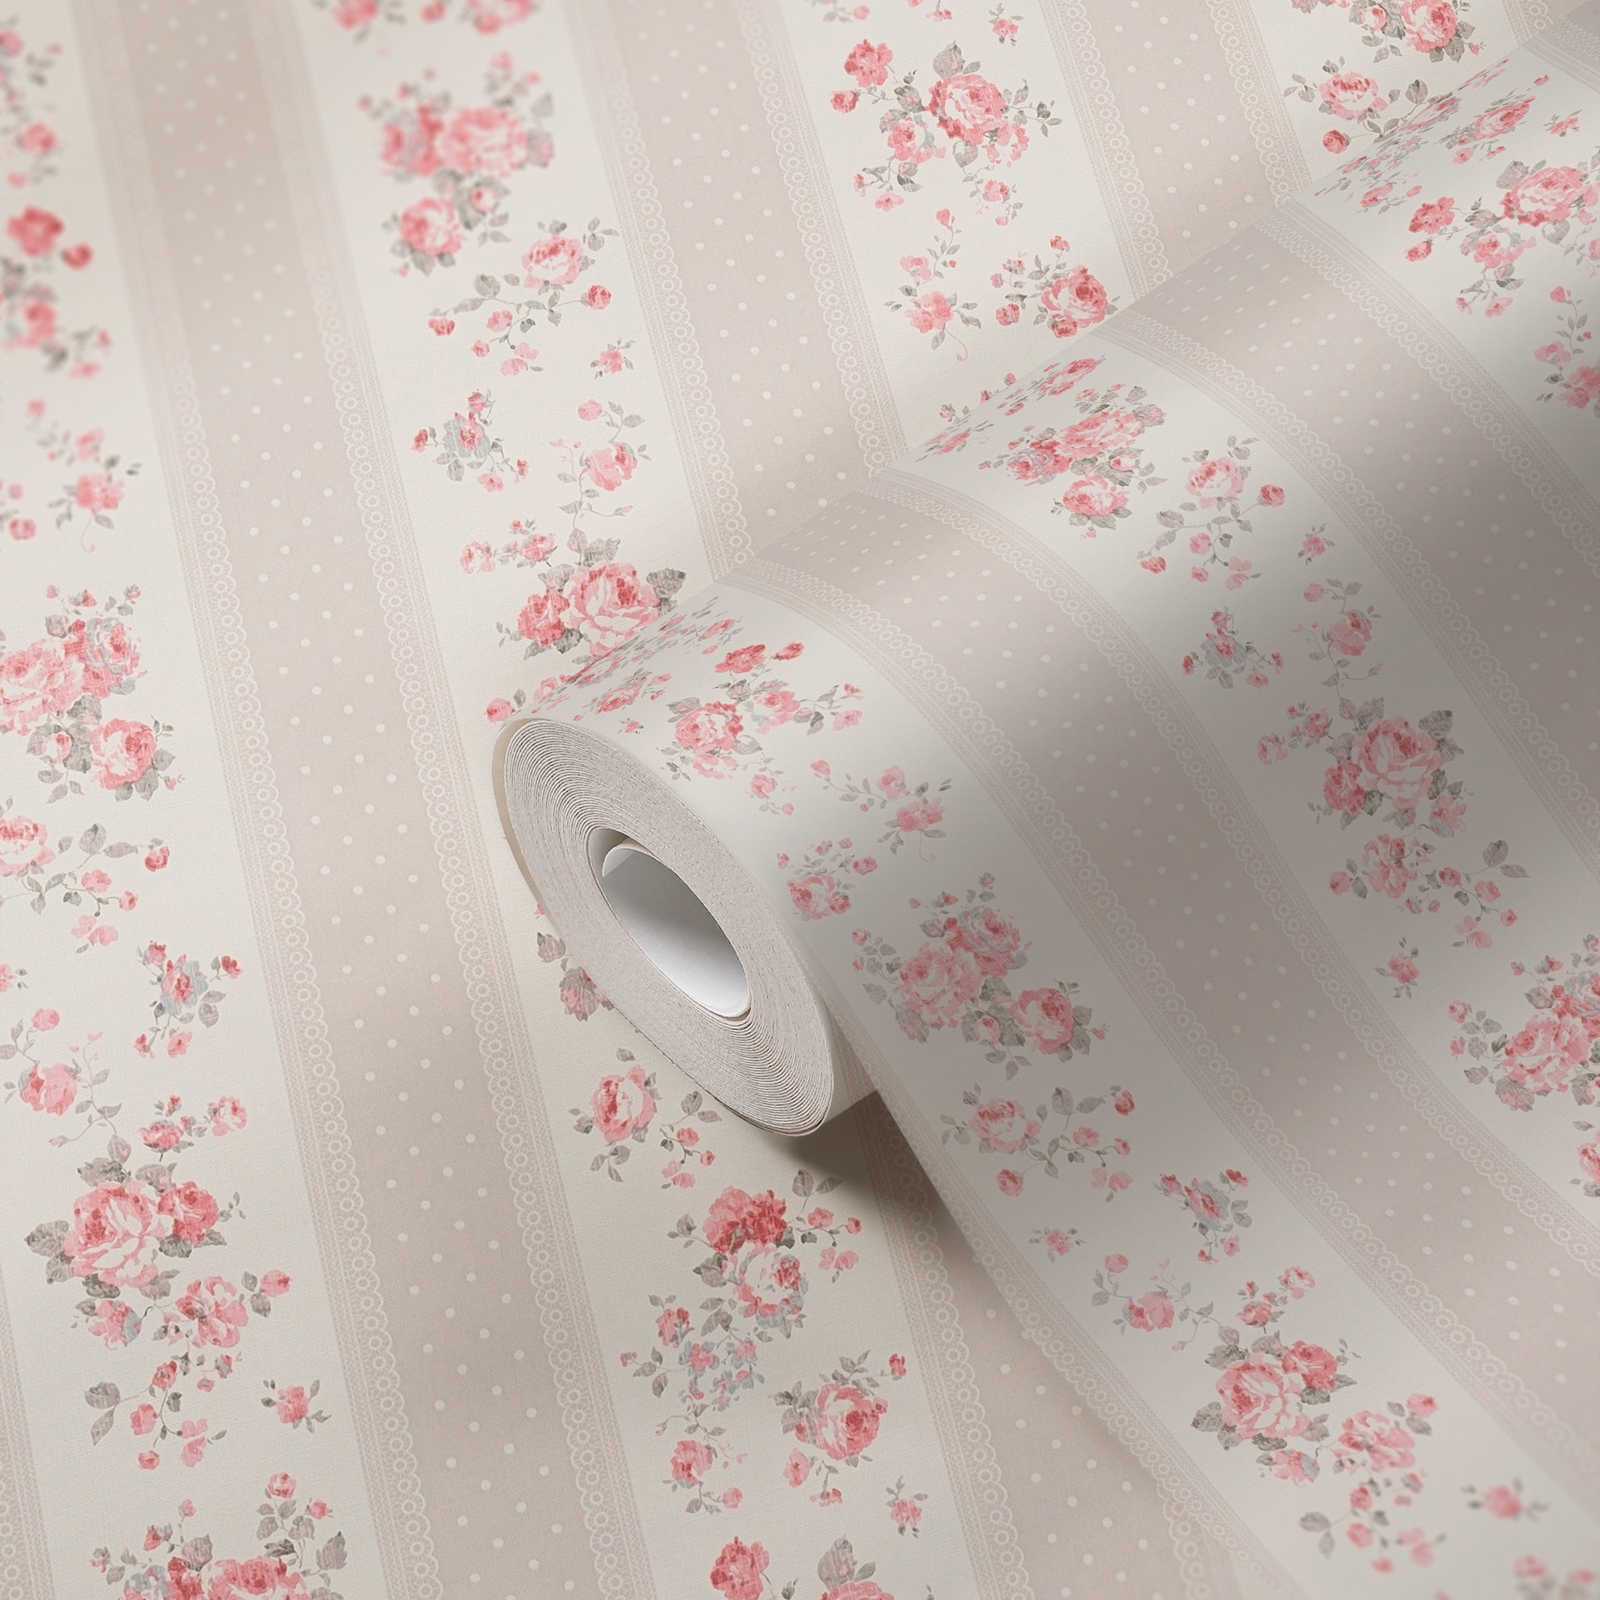             Shabby Chic style wallpaper with floral and dotted stripes - greige, white, red
        